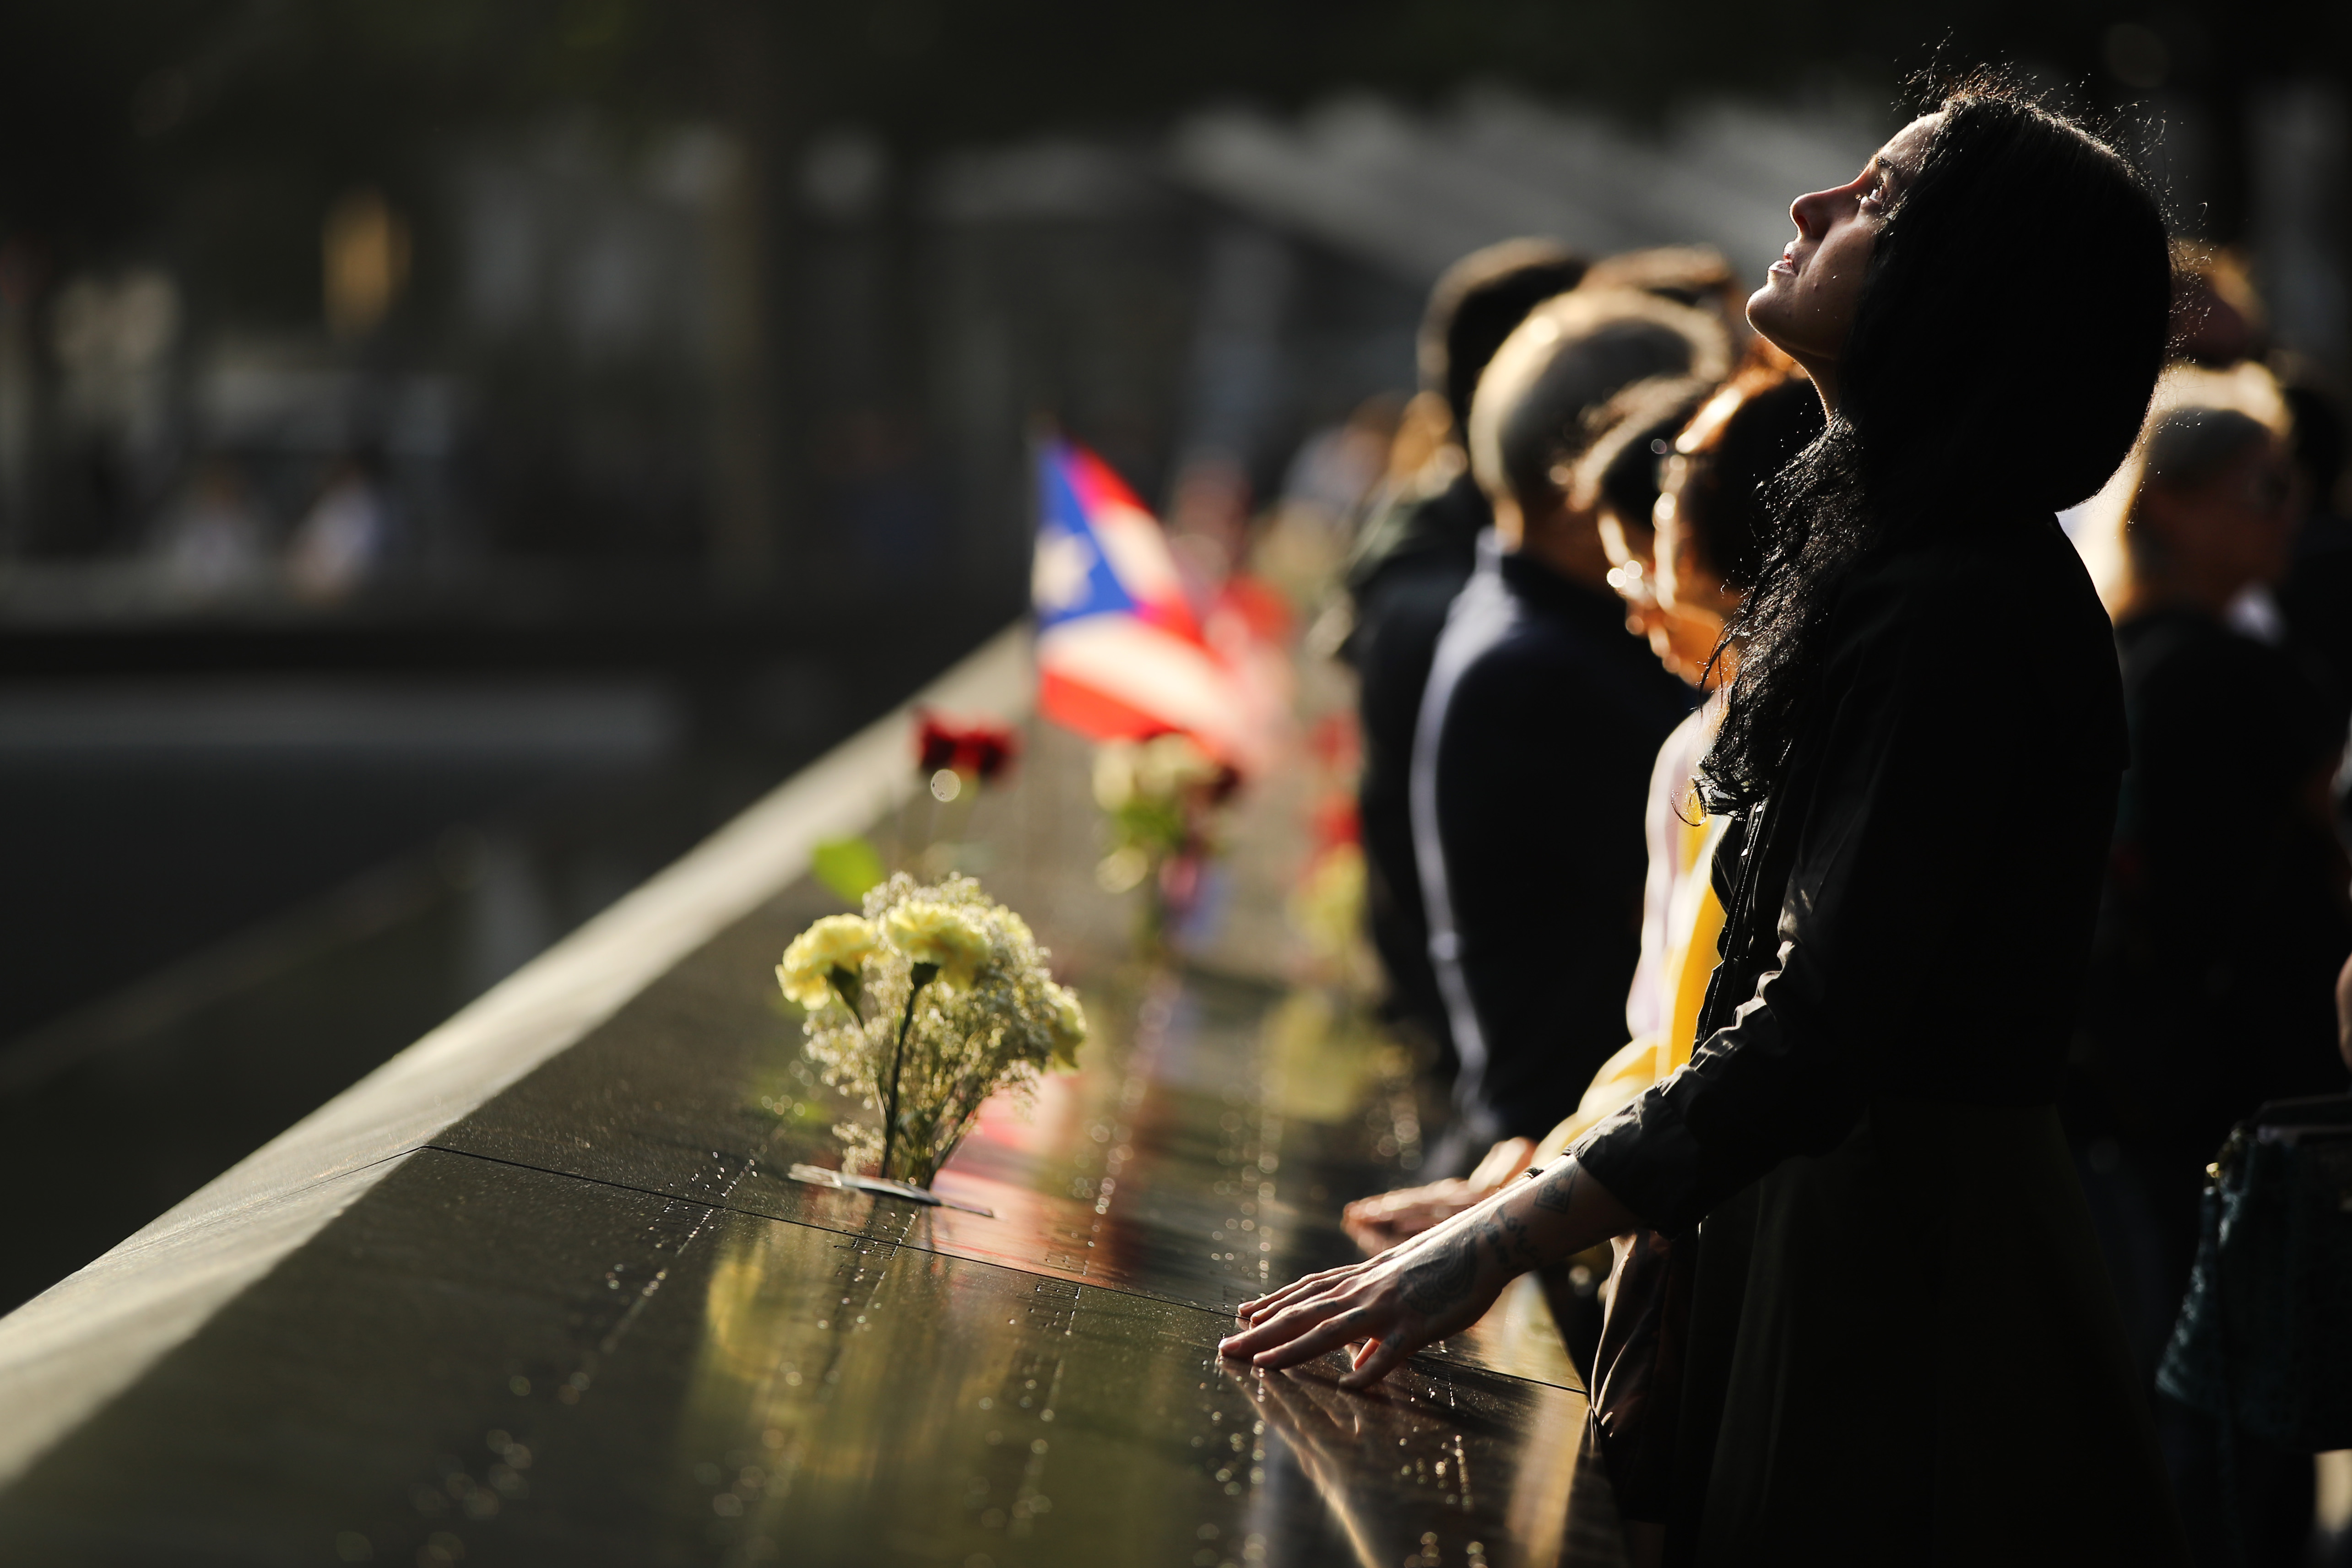 Alexandra Hamatie, whose cousin Robert Horohoe was killed on September 11, pauses at the National September 11 Memorial.